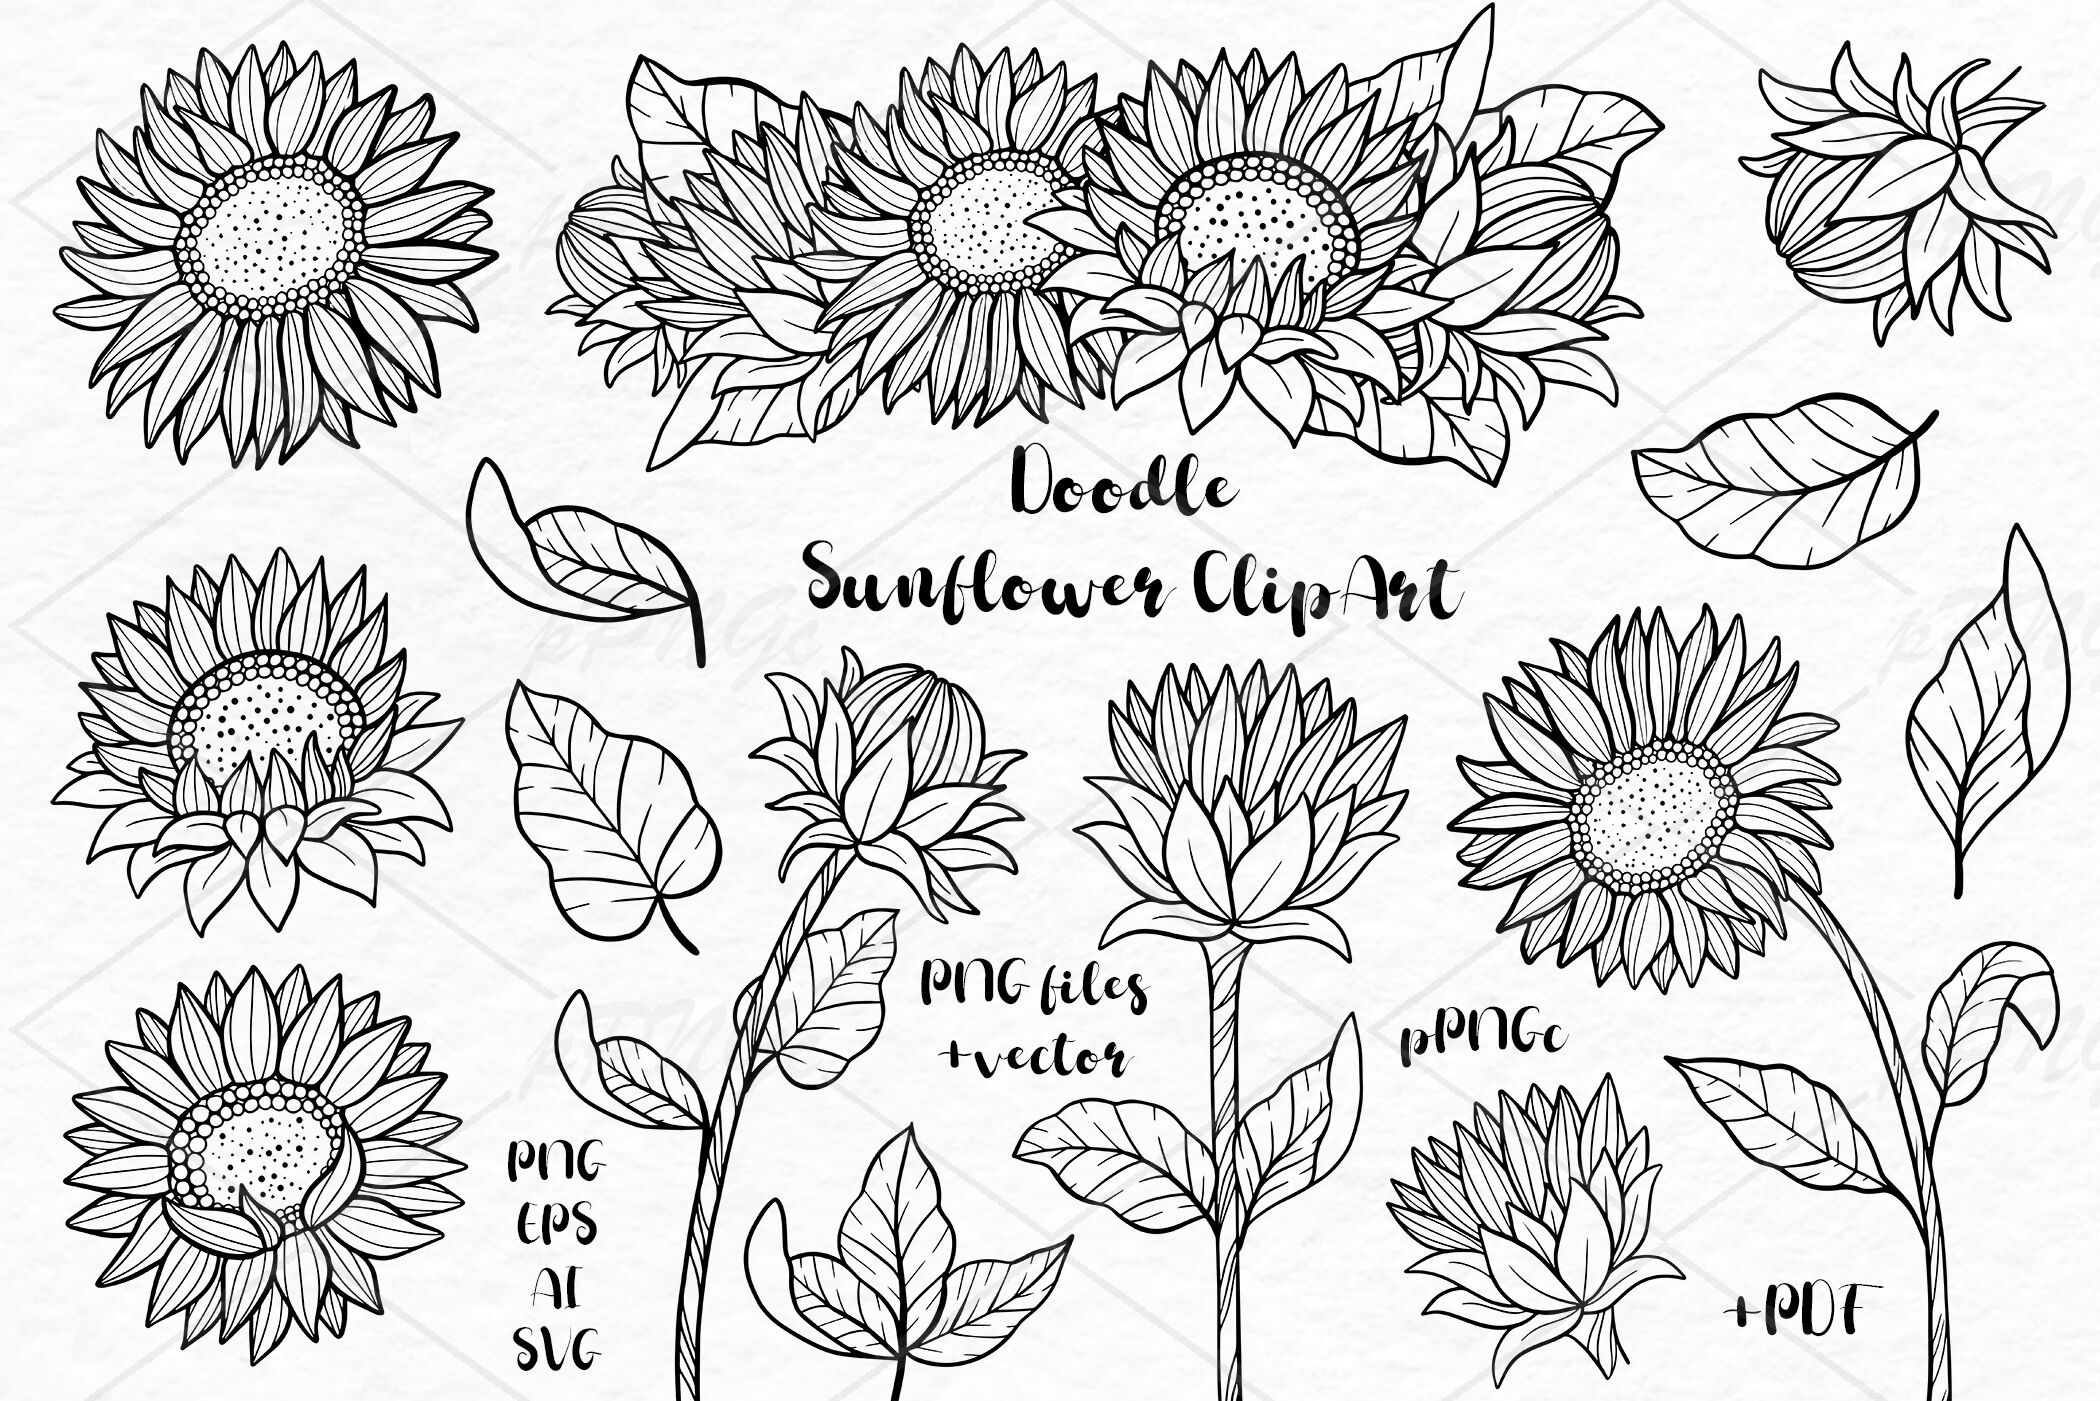 Doodle Sunflower Clipart By